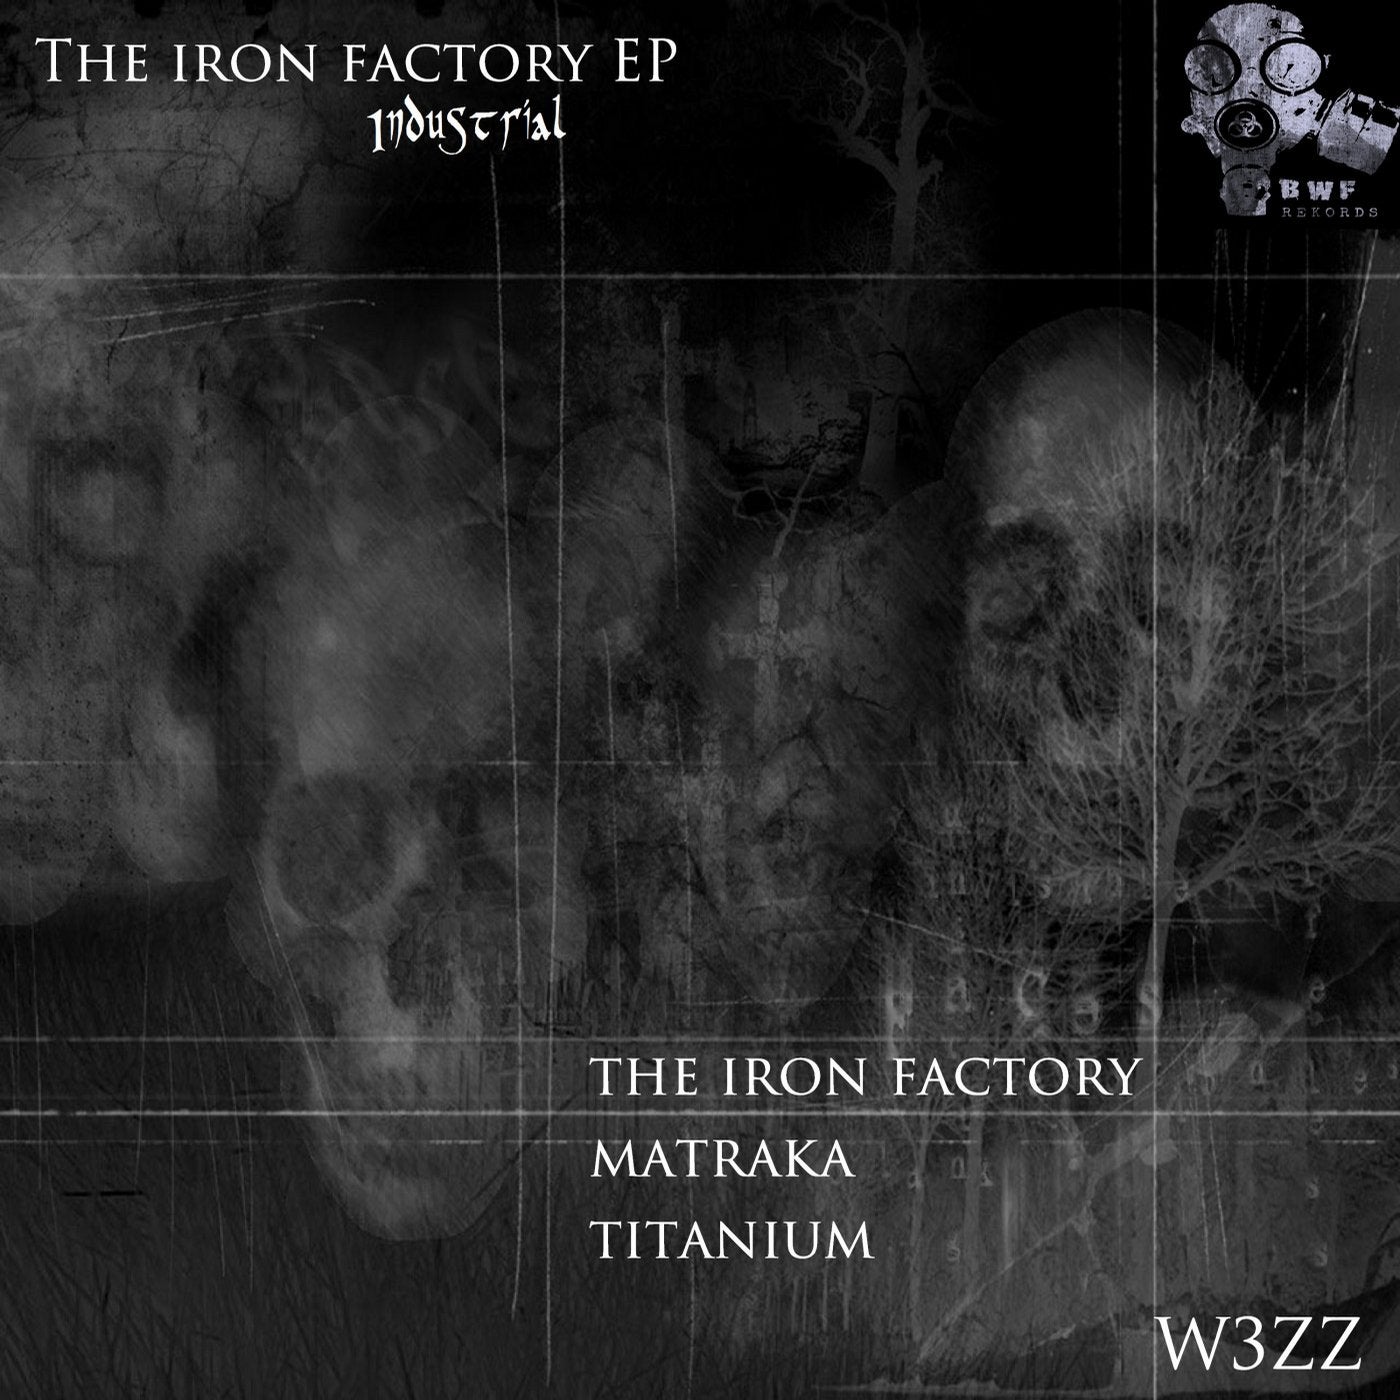 The iron factory EP